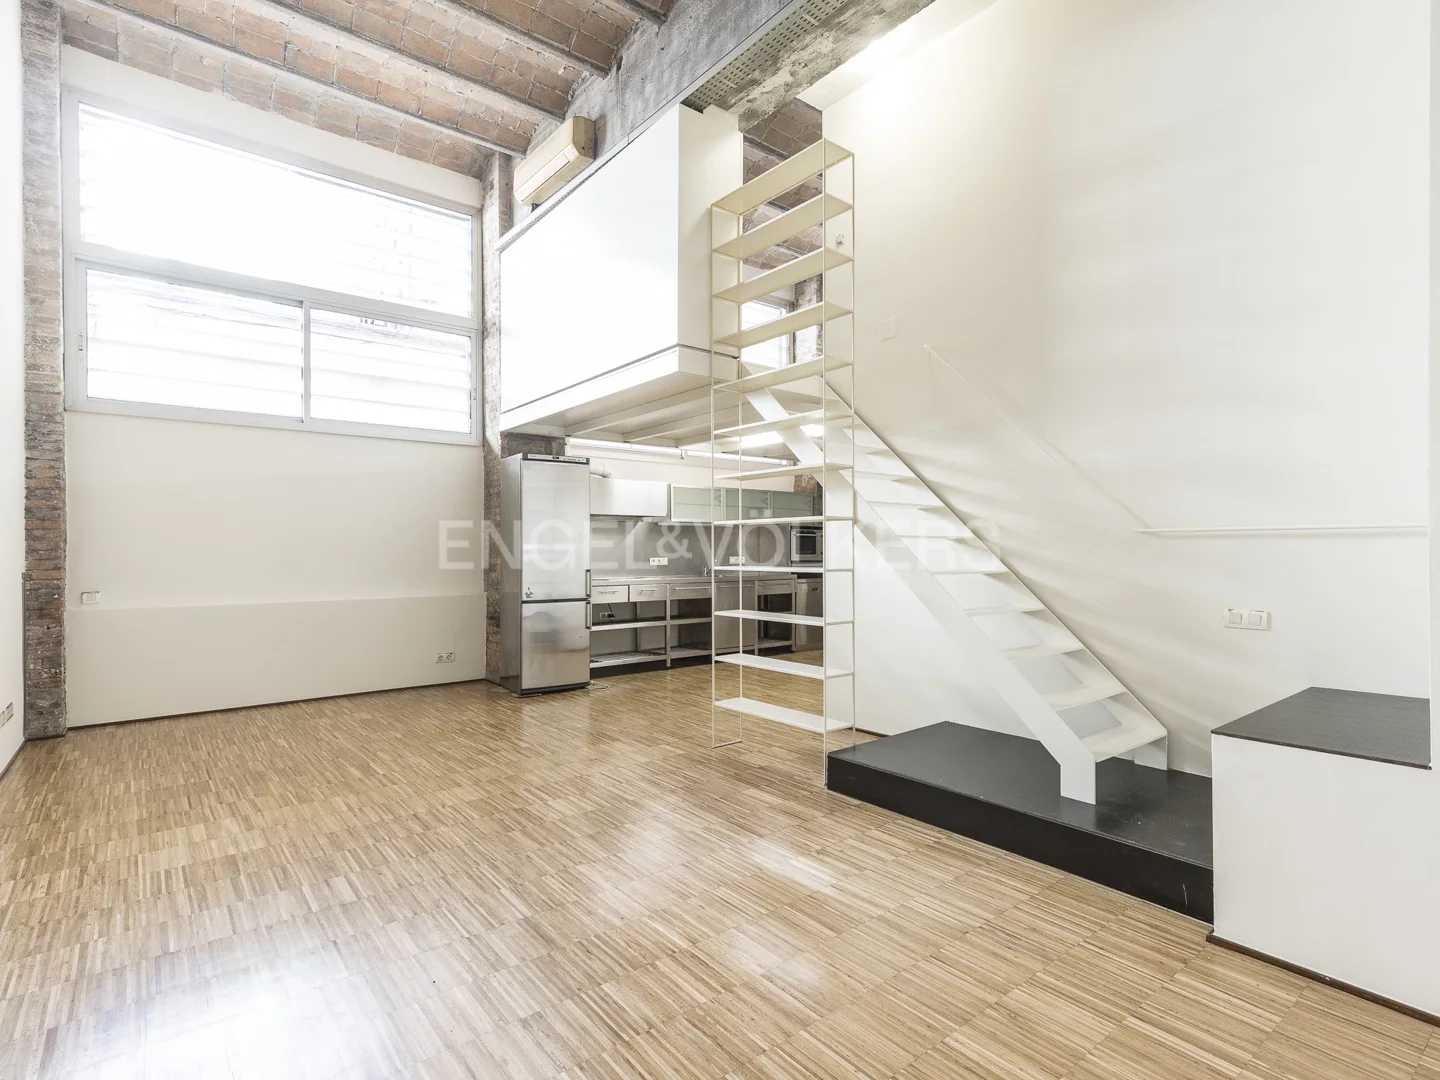 Industrial style loft in the heart of Poblenou